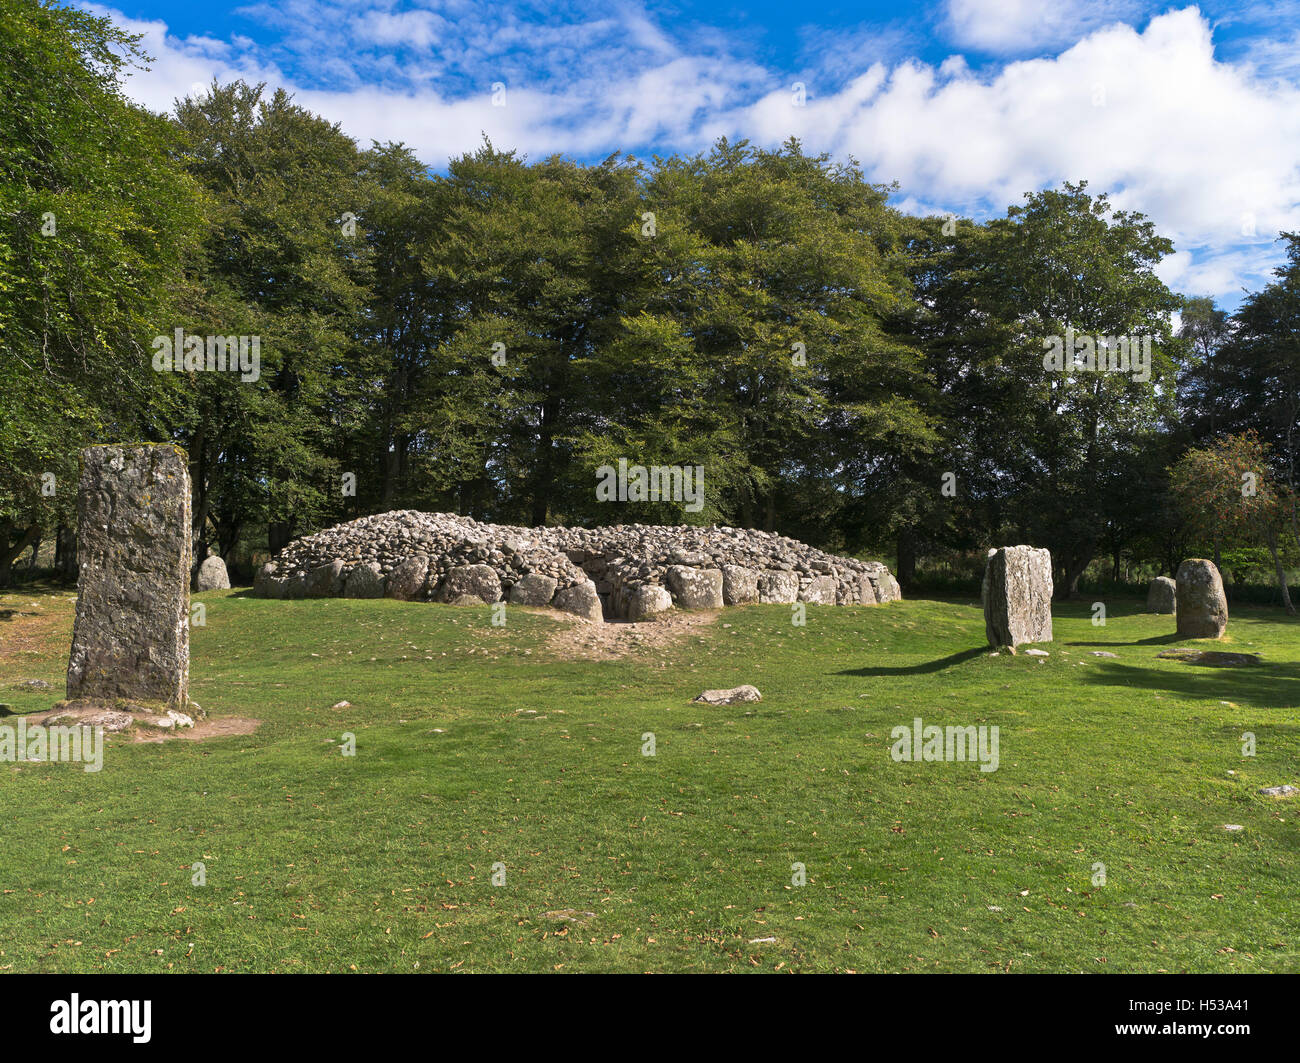 dh Balnuaran Bronze age cairn CLAVA CAIRNS INVERNESS SHIRE Stone Chamber graves Scotland neolithic tomb stones uk britain site of burial circle Stock Photo